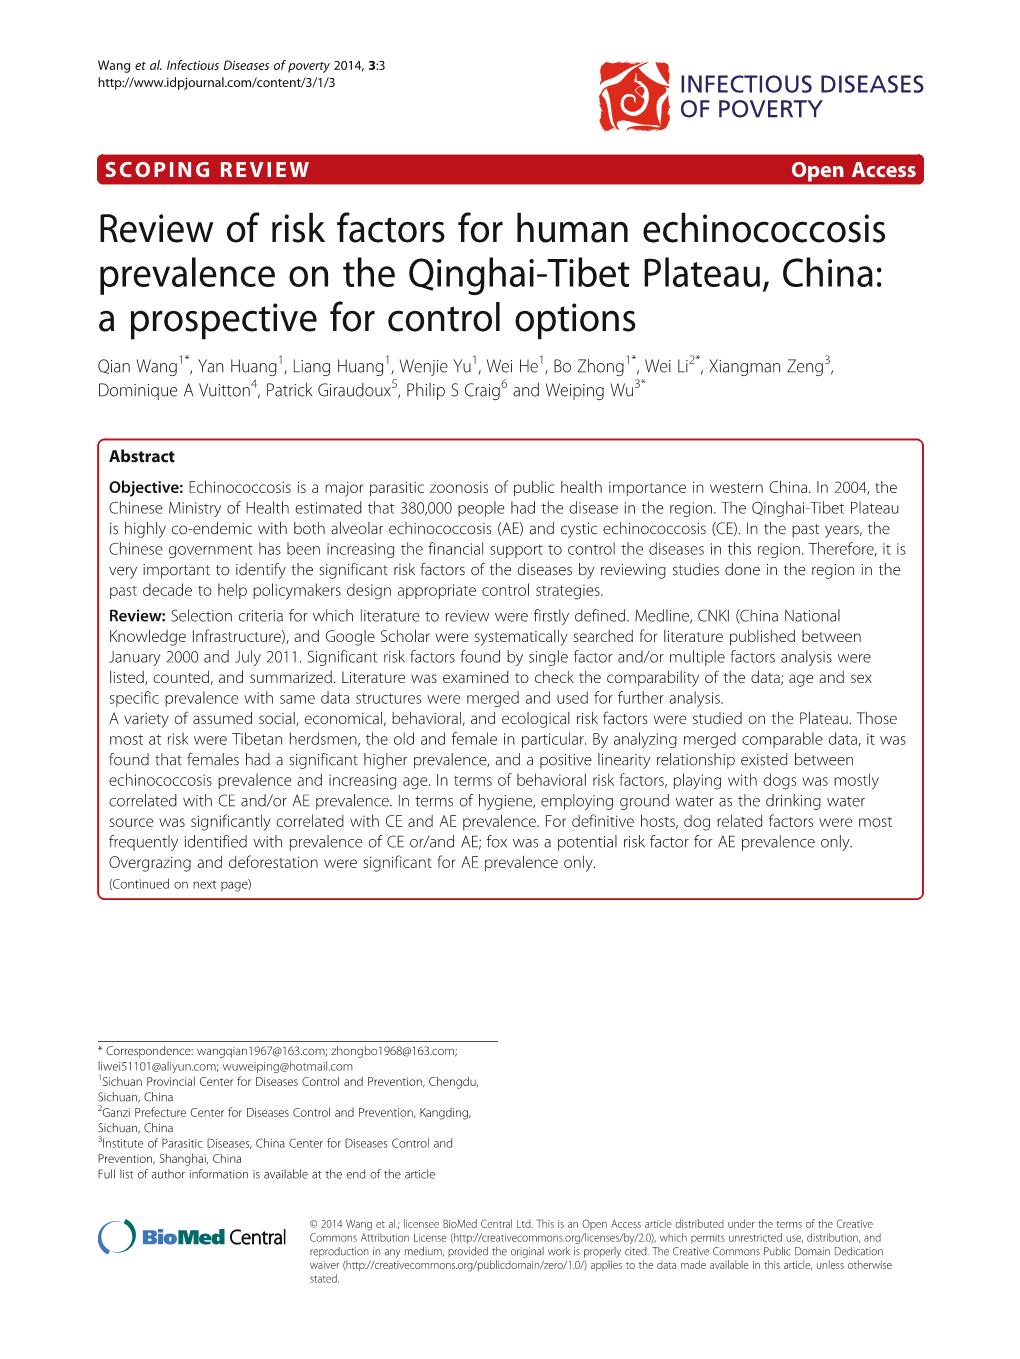 Review of Risk Factors for Human Echinococcosis